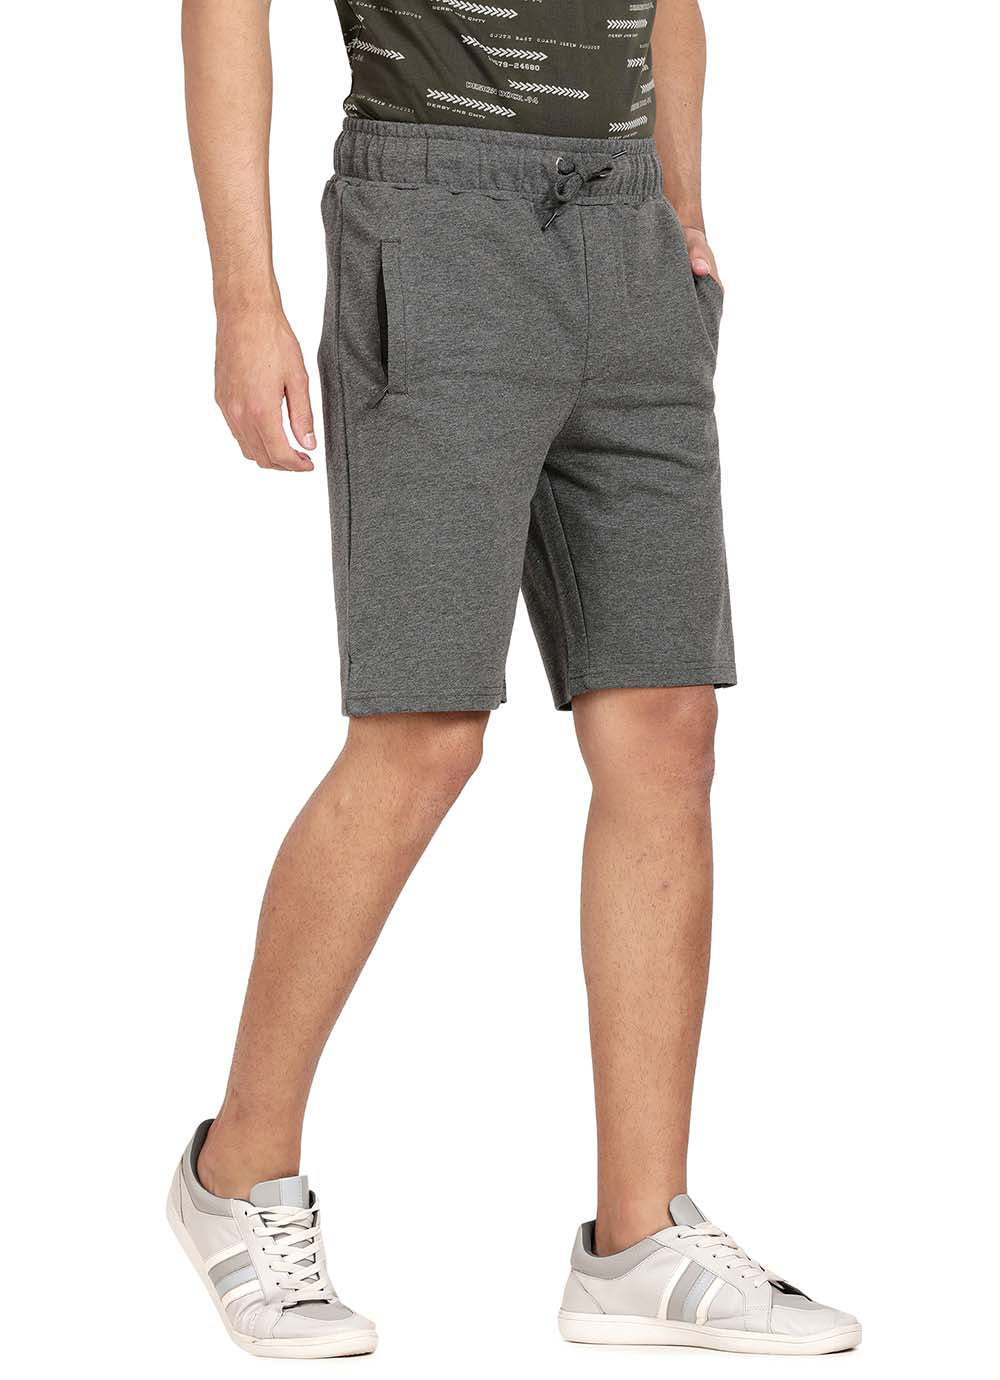 Derby Charcoal Solid Cotton Slim Fit Shorts